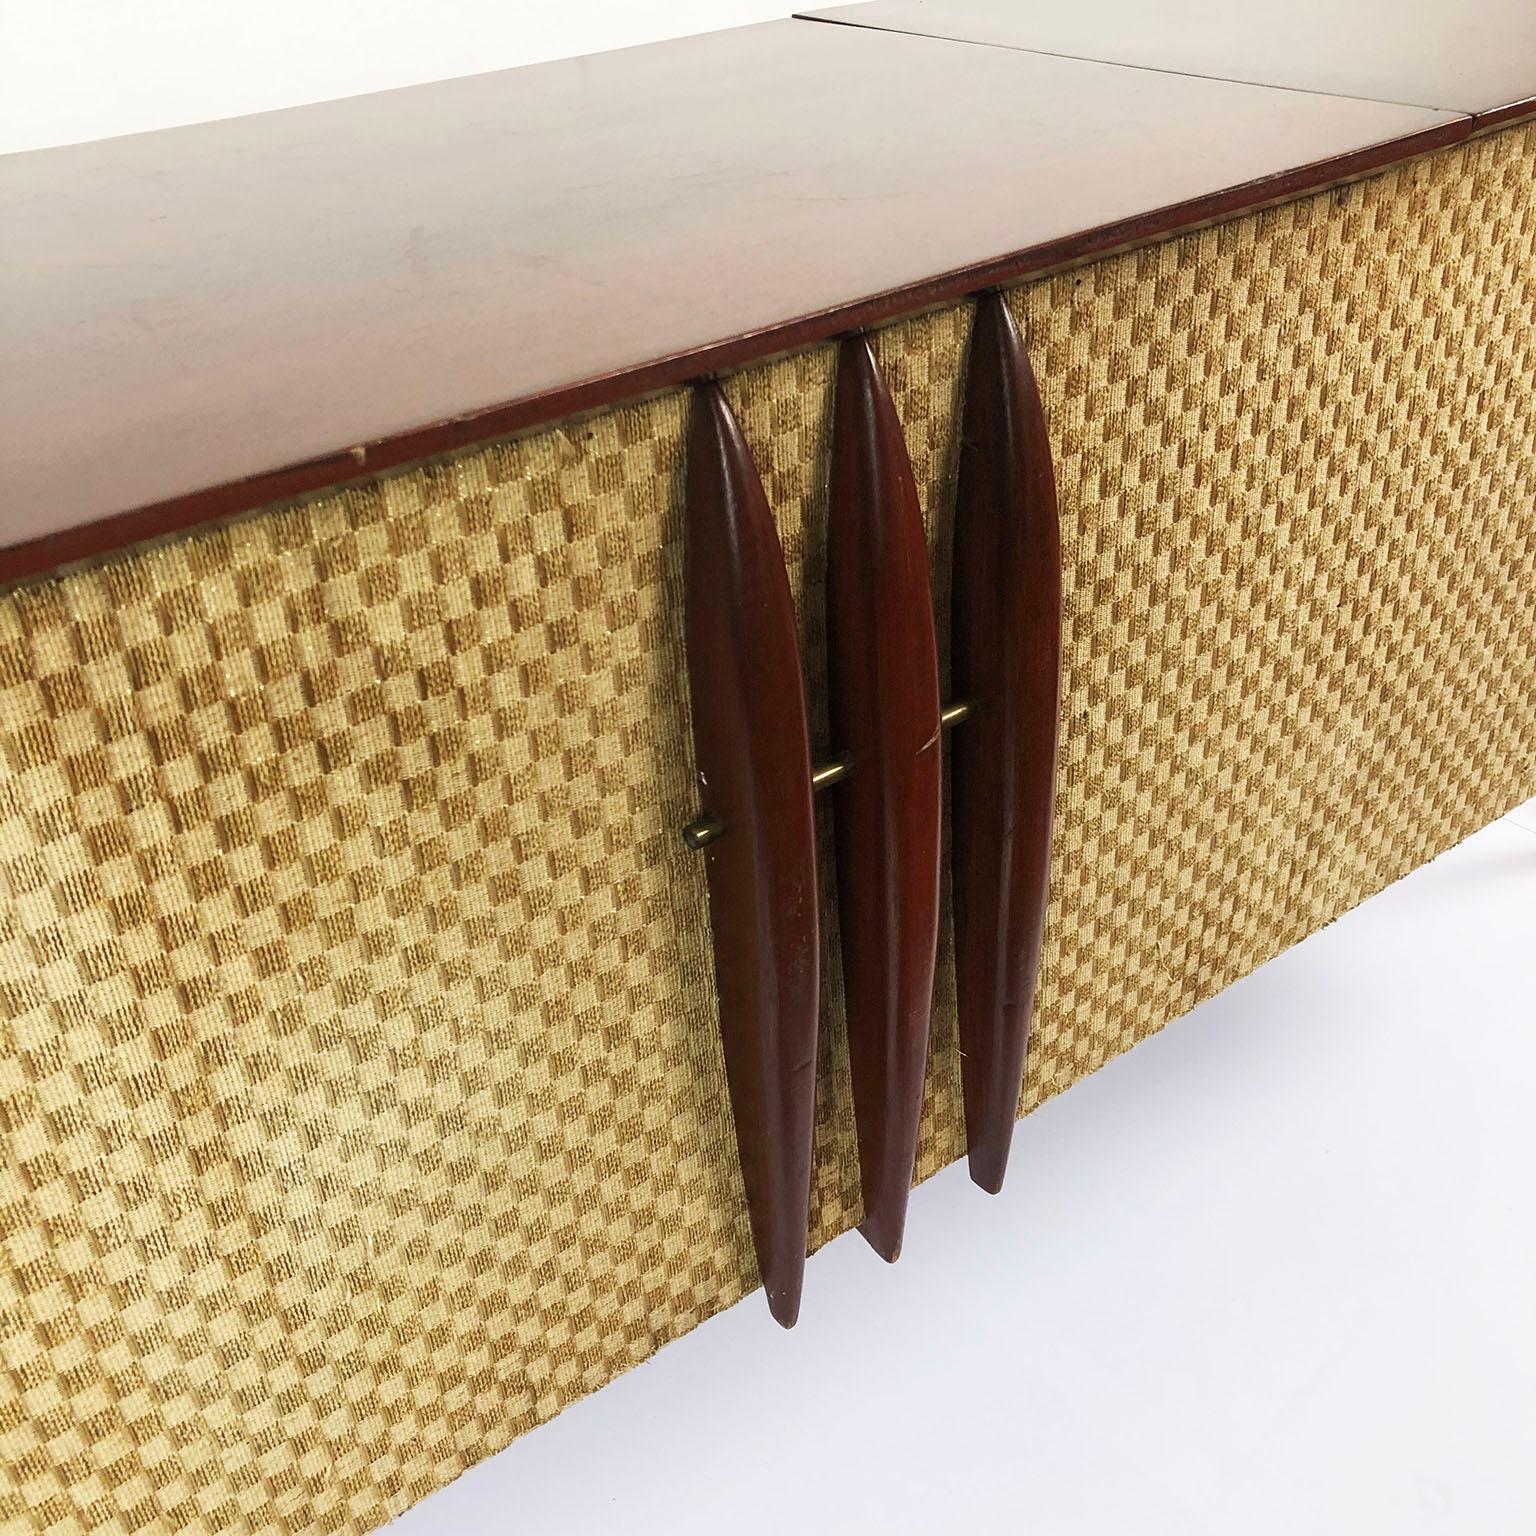 We offer this midcentury record player console with amazing design, the console works, circa 1950.